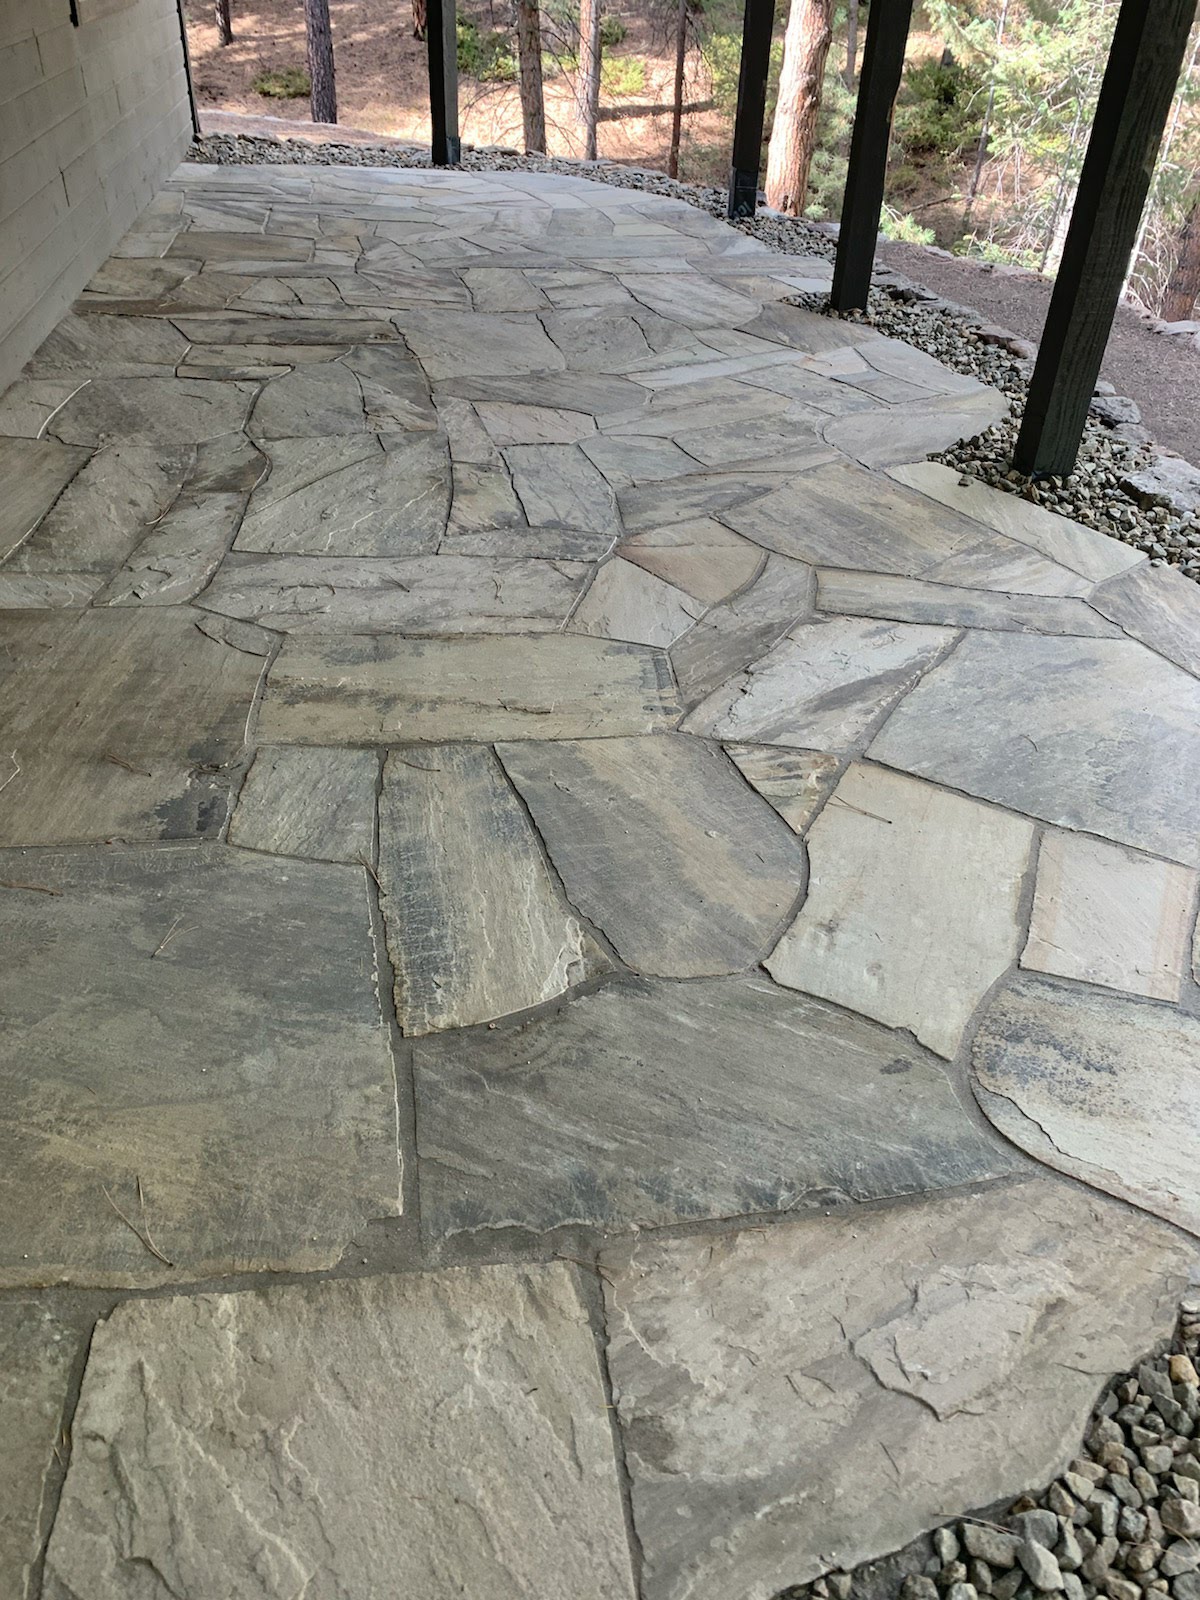 Large flagstones made into patio.